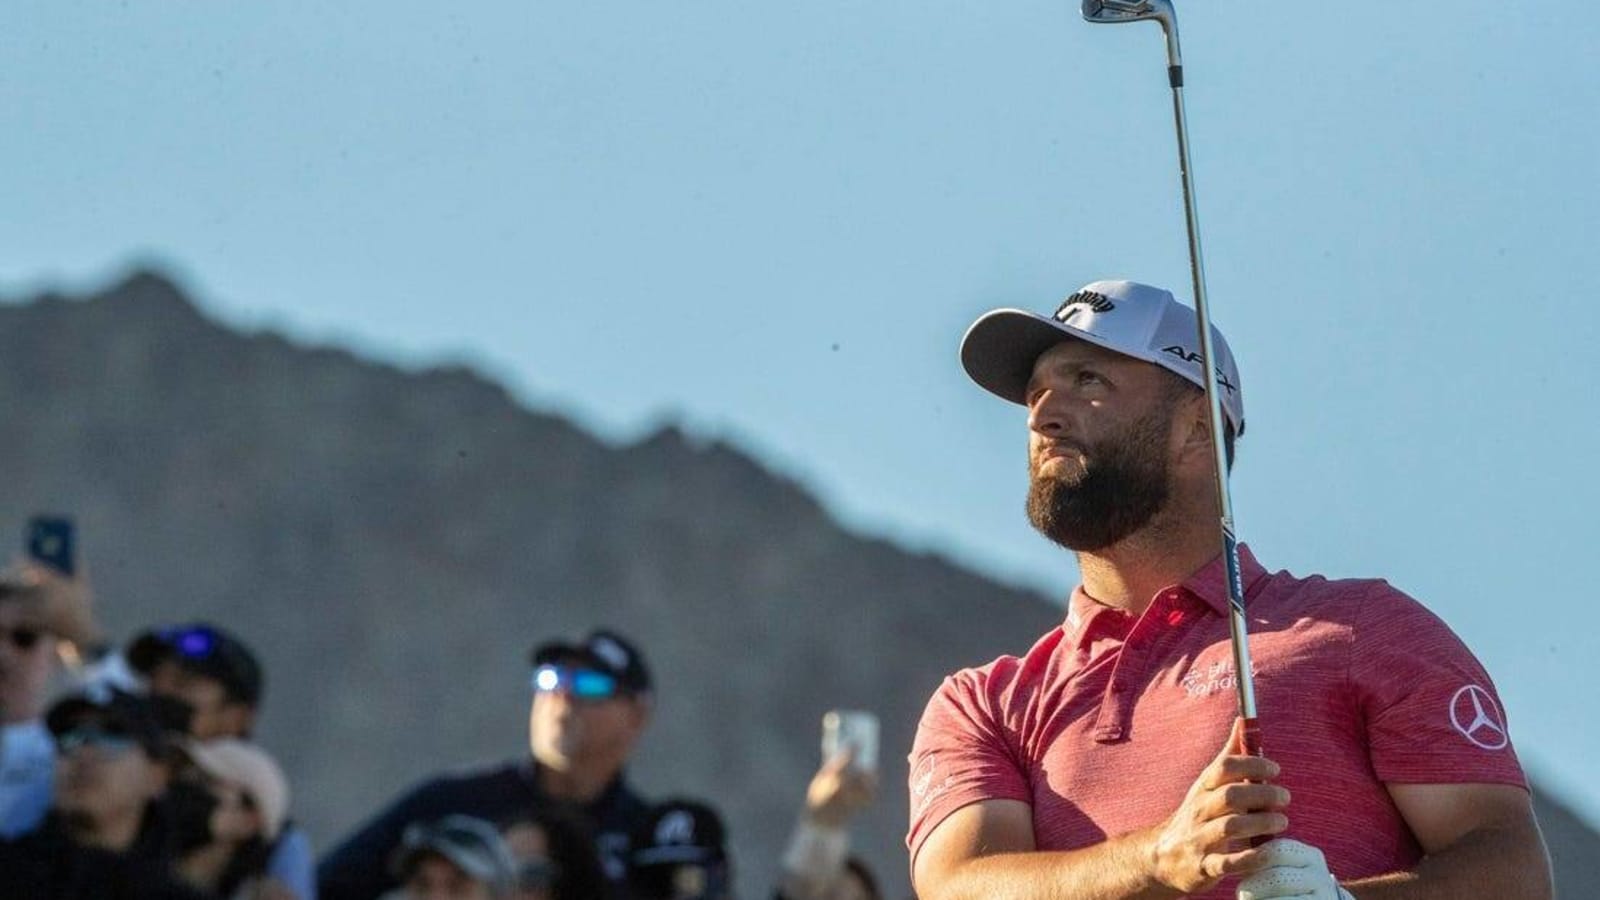 Defending champ Jon Rahm not listed among AmEx notables